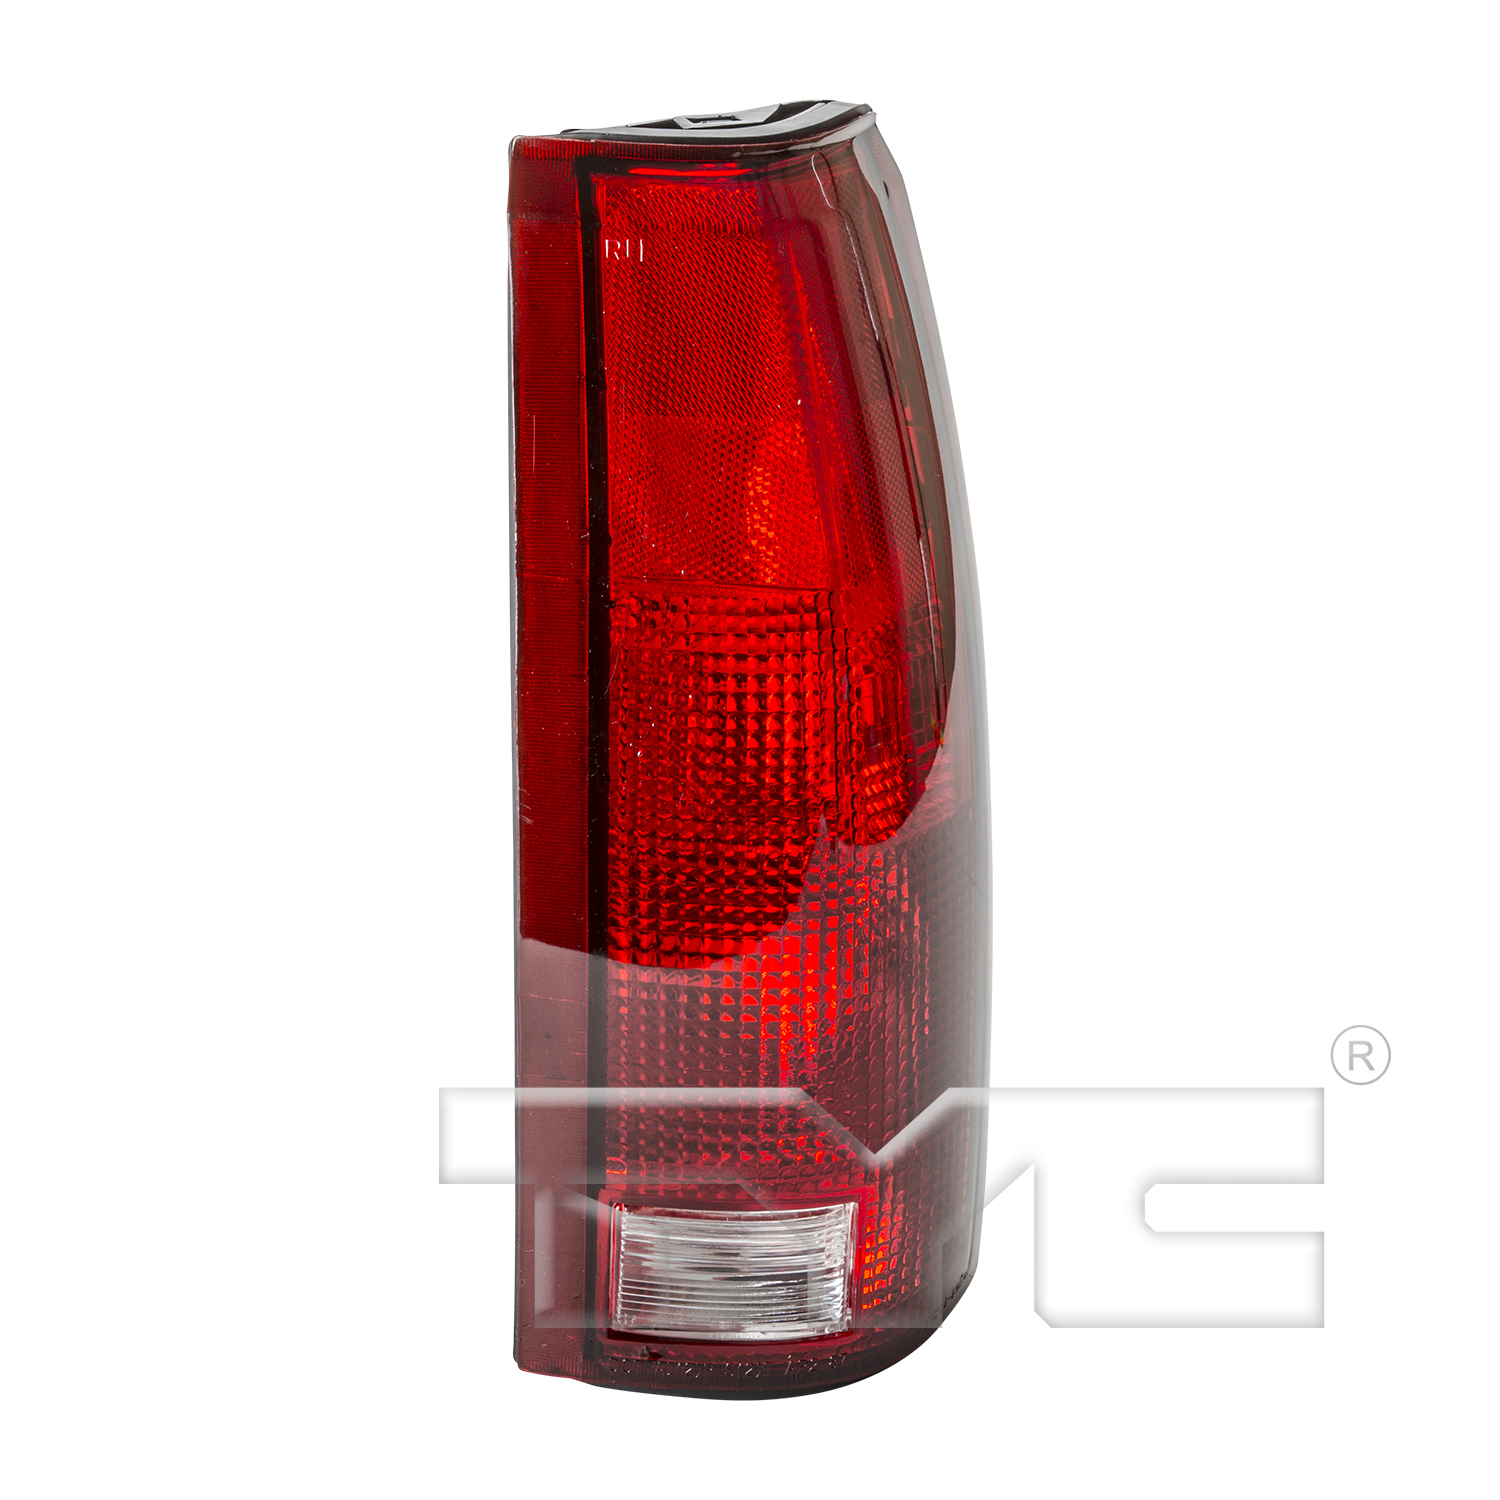 Aftermarket TAILLIGHTS for CADILLAC - ESCALADE, ESCALADE,99-00,RT Taillamp lens